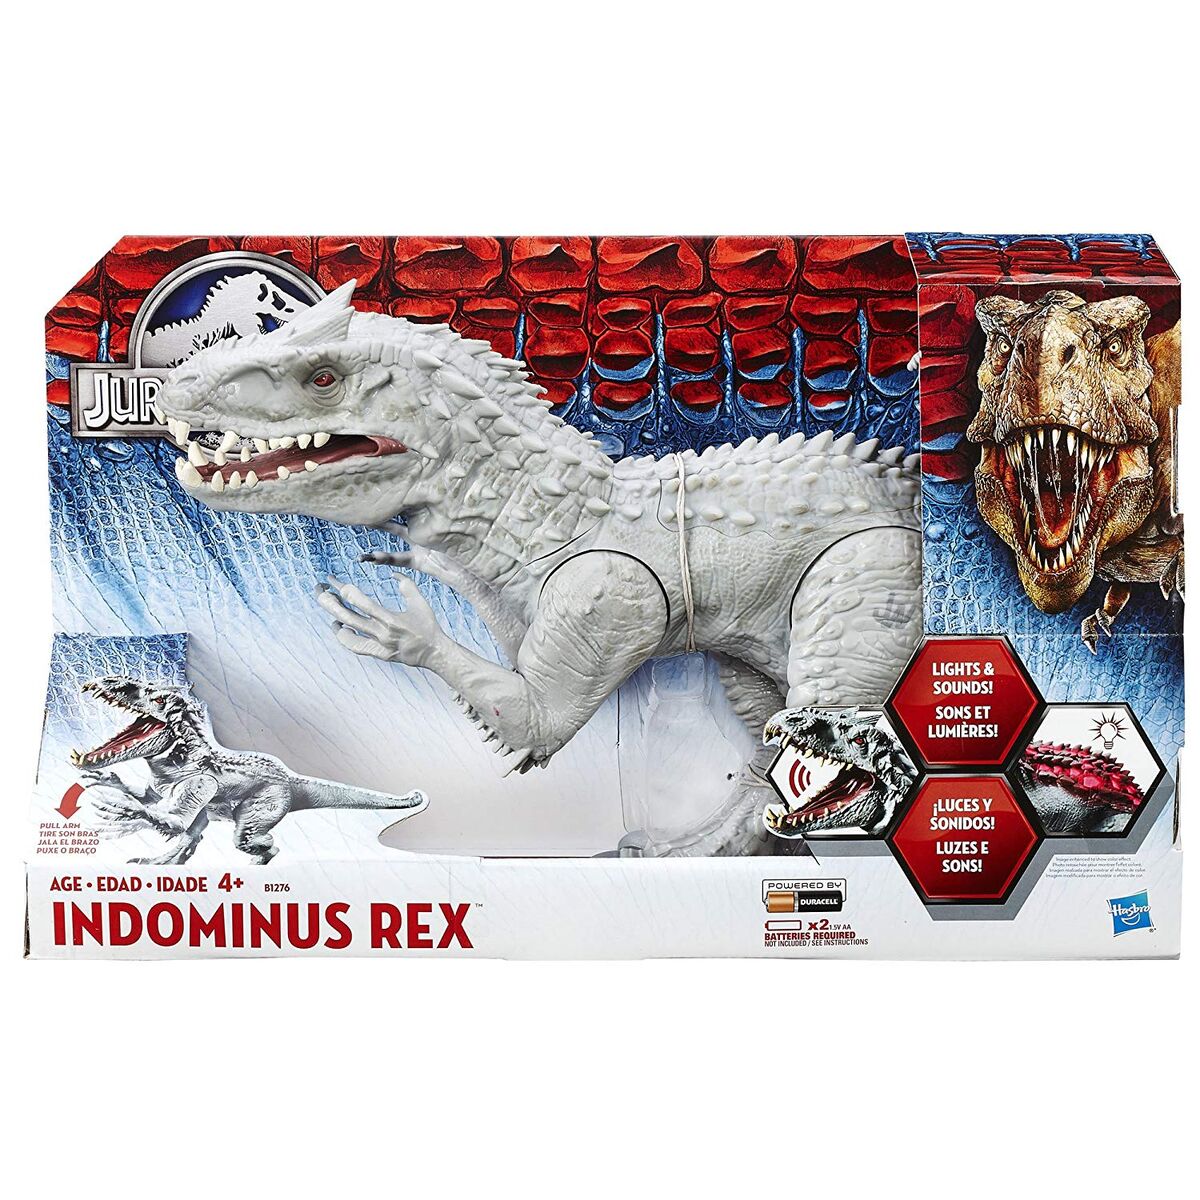 Let's Engineer Indominus RexAnd a Glowing Unicorn!